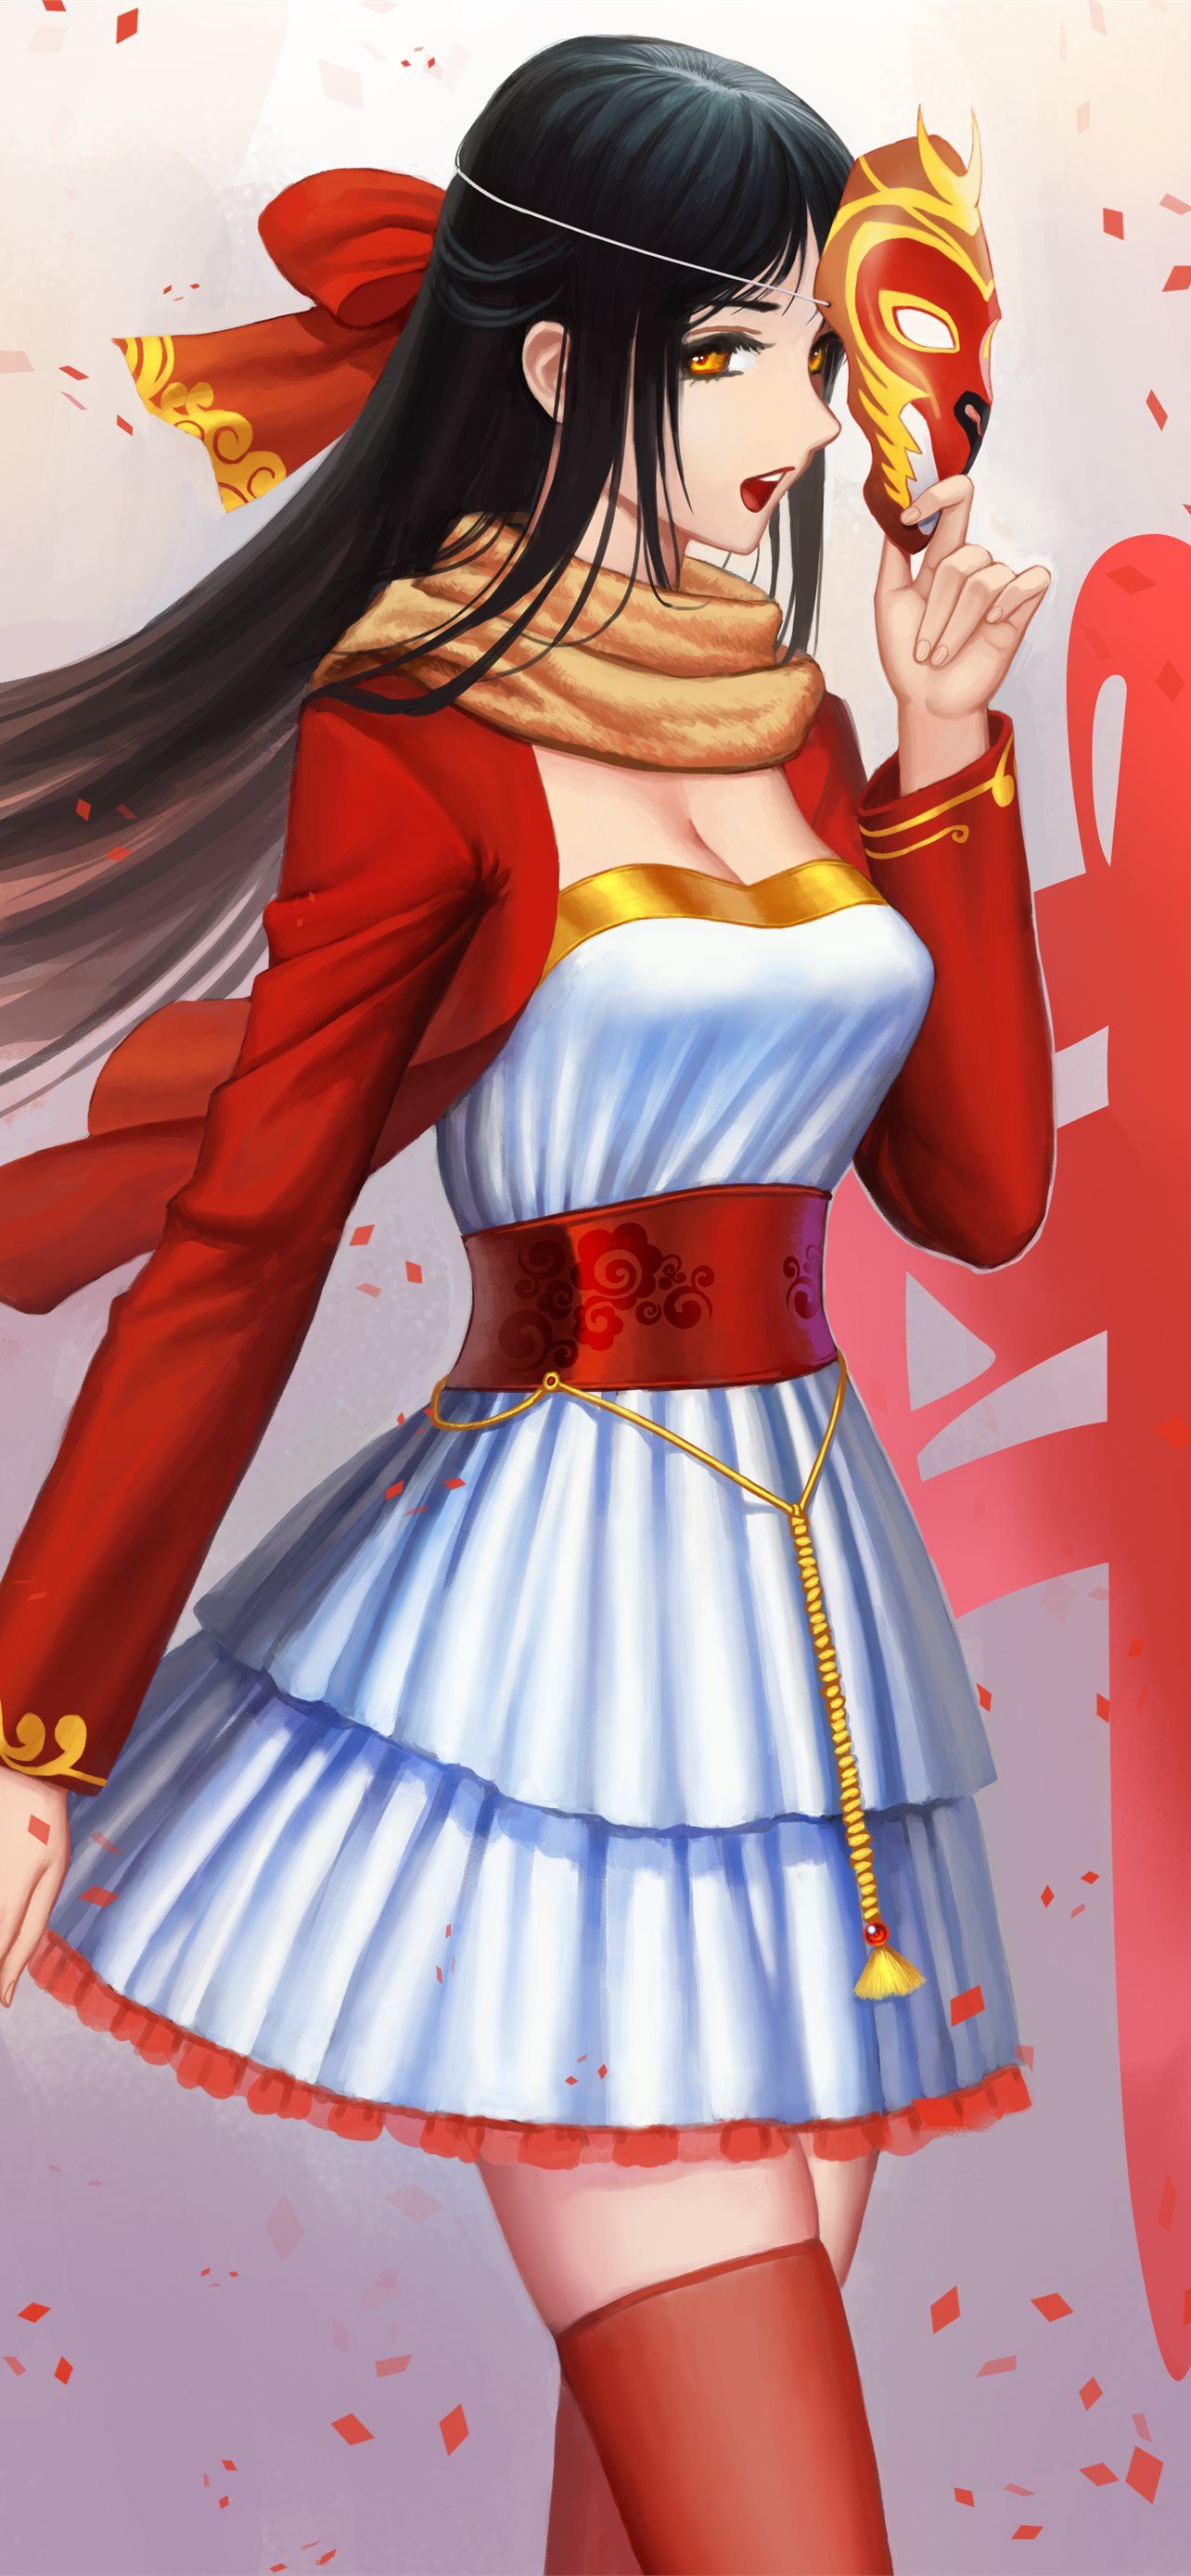 Anime Anime Girls Chinese New Year Long Hair Mask. iPhone Wallpaper Free Download